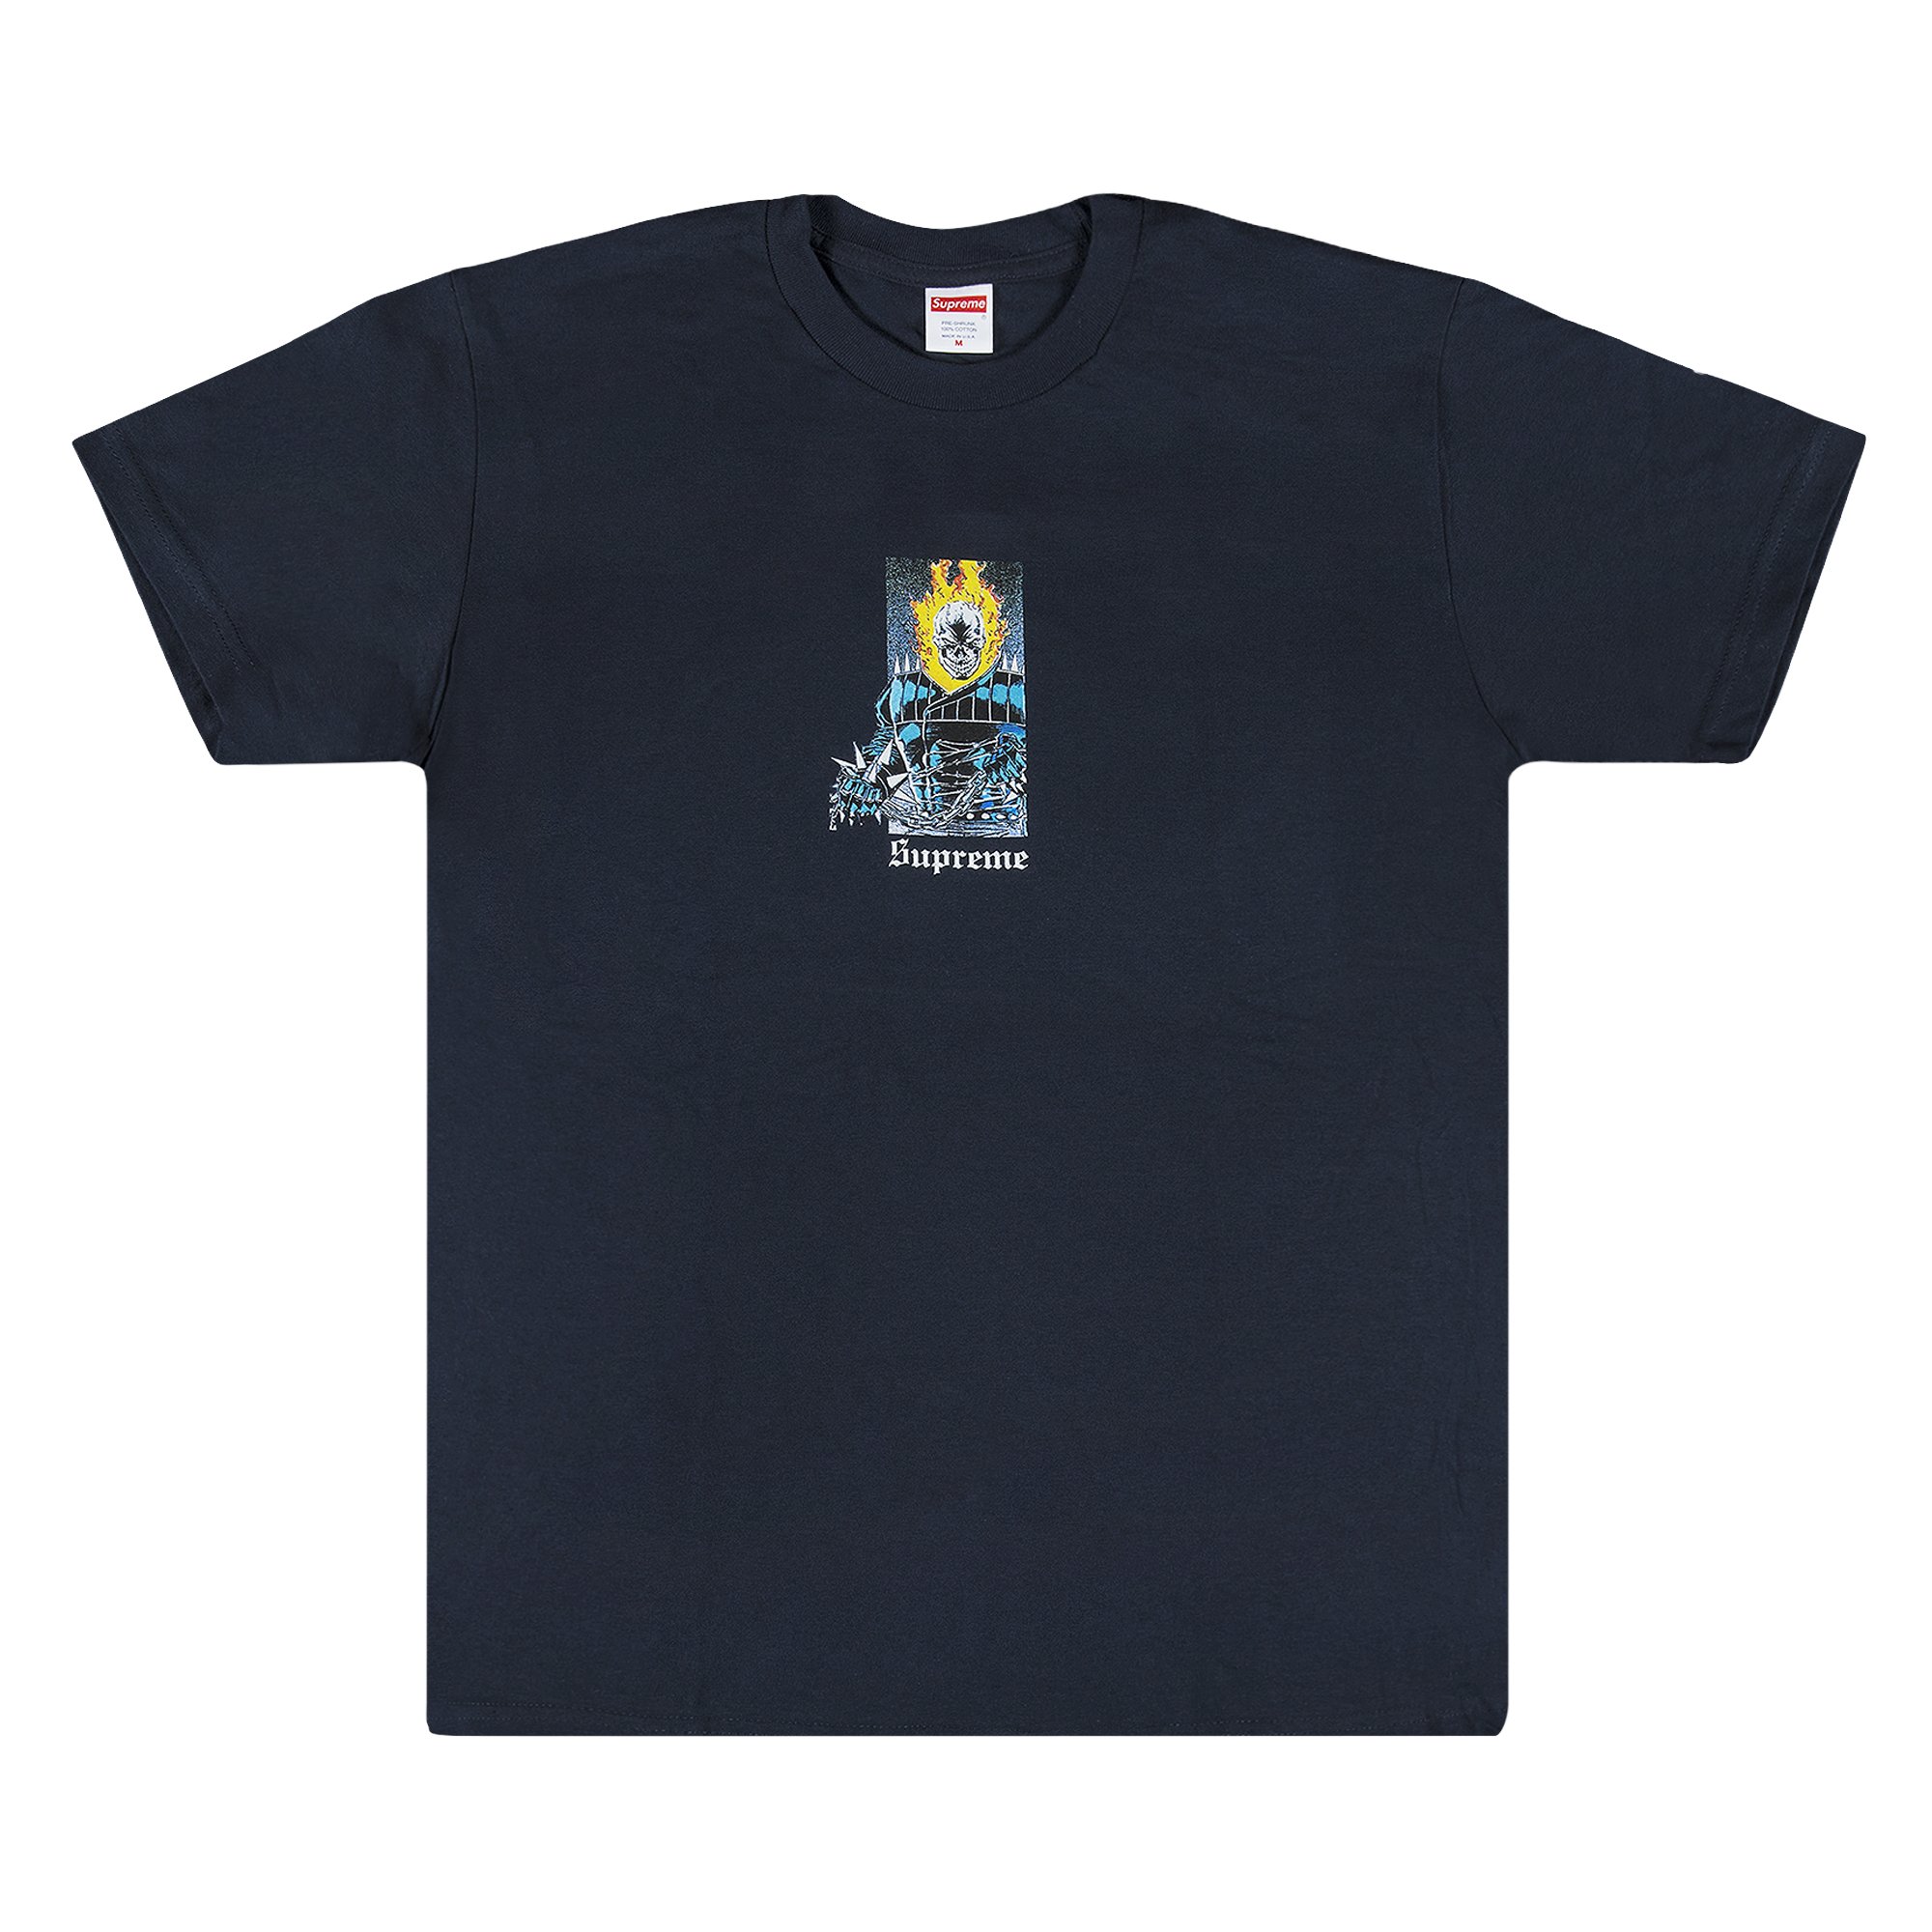 Buy Supreme Ghost Rider T-Shirt 'Navy' - SS19T16 NAVY | GOAT